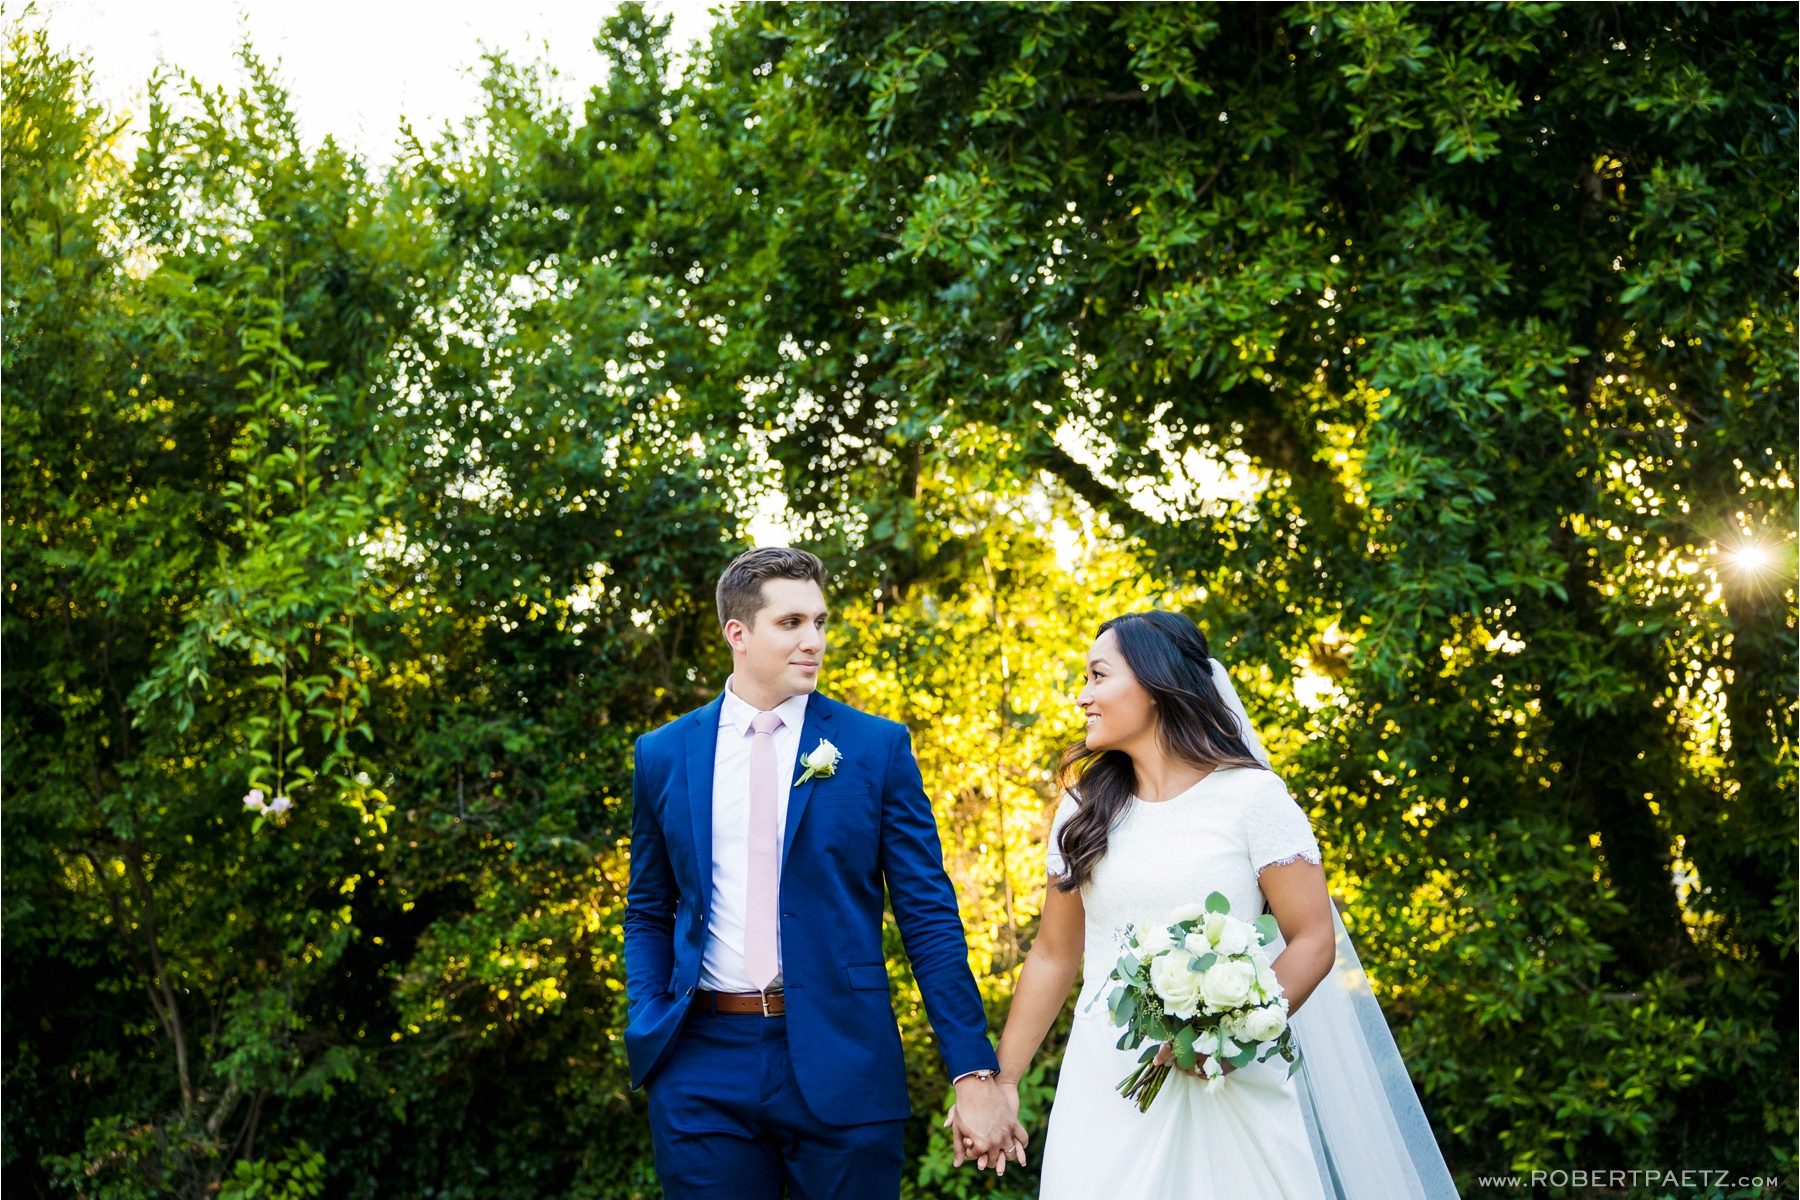 A backyard, social distanced, Zoom wedding in Arcadia, California, during the Covid-19 pandemic photographed by the destination wedding photographer, Robert Paetz.